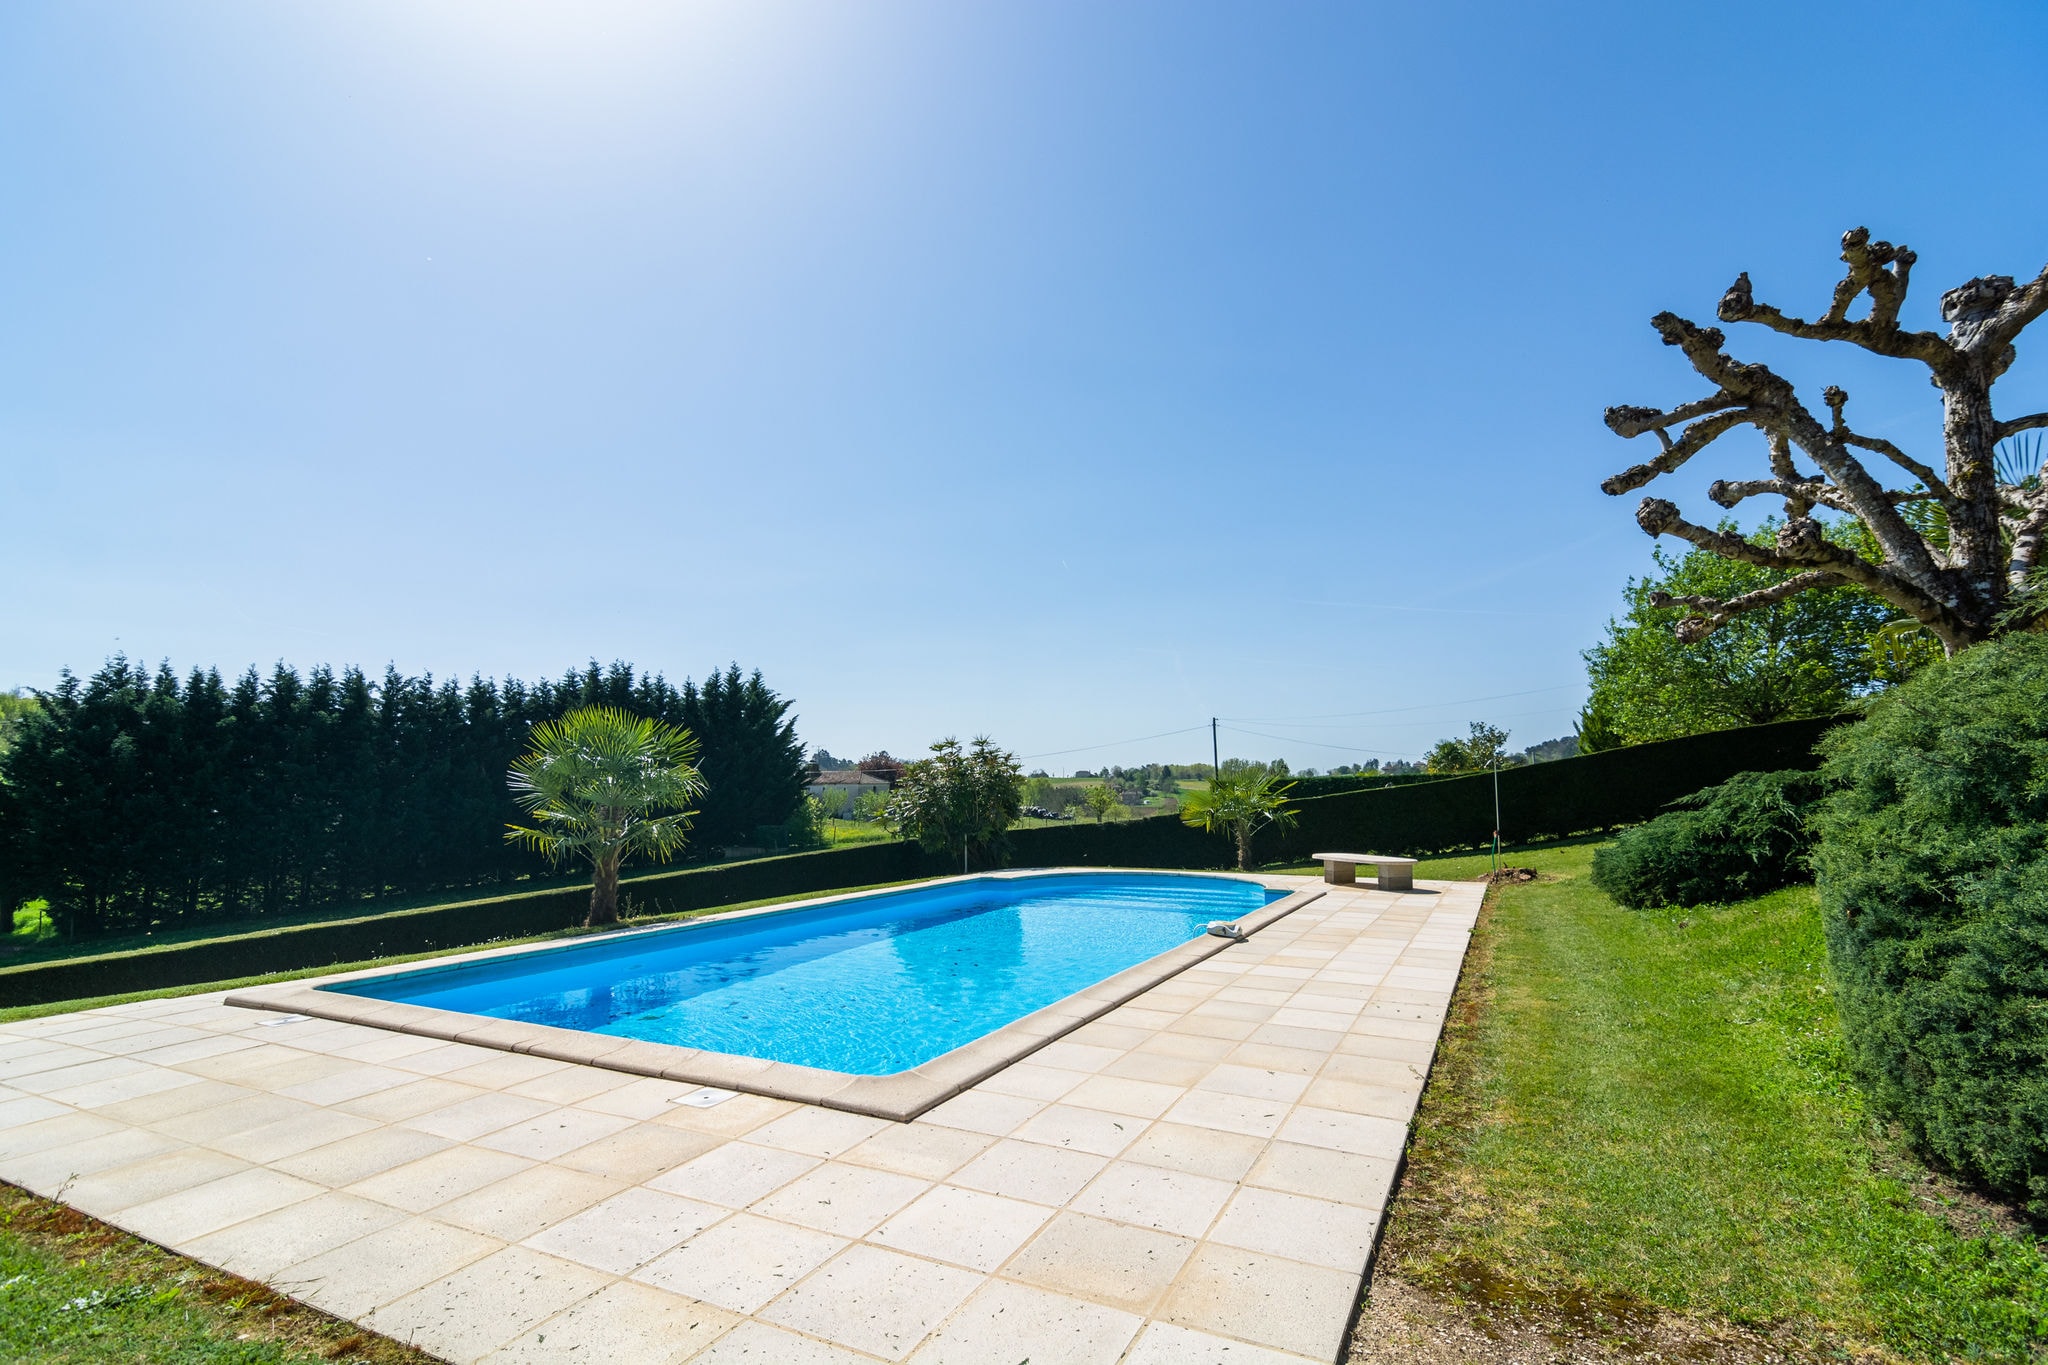 Panoramic views of nature near Loubejac at beautifully situated holiday home.